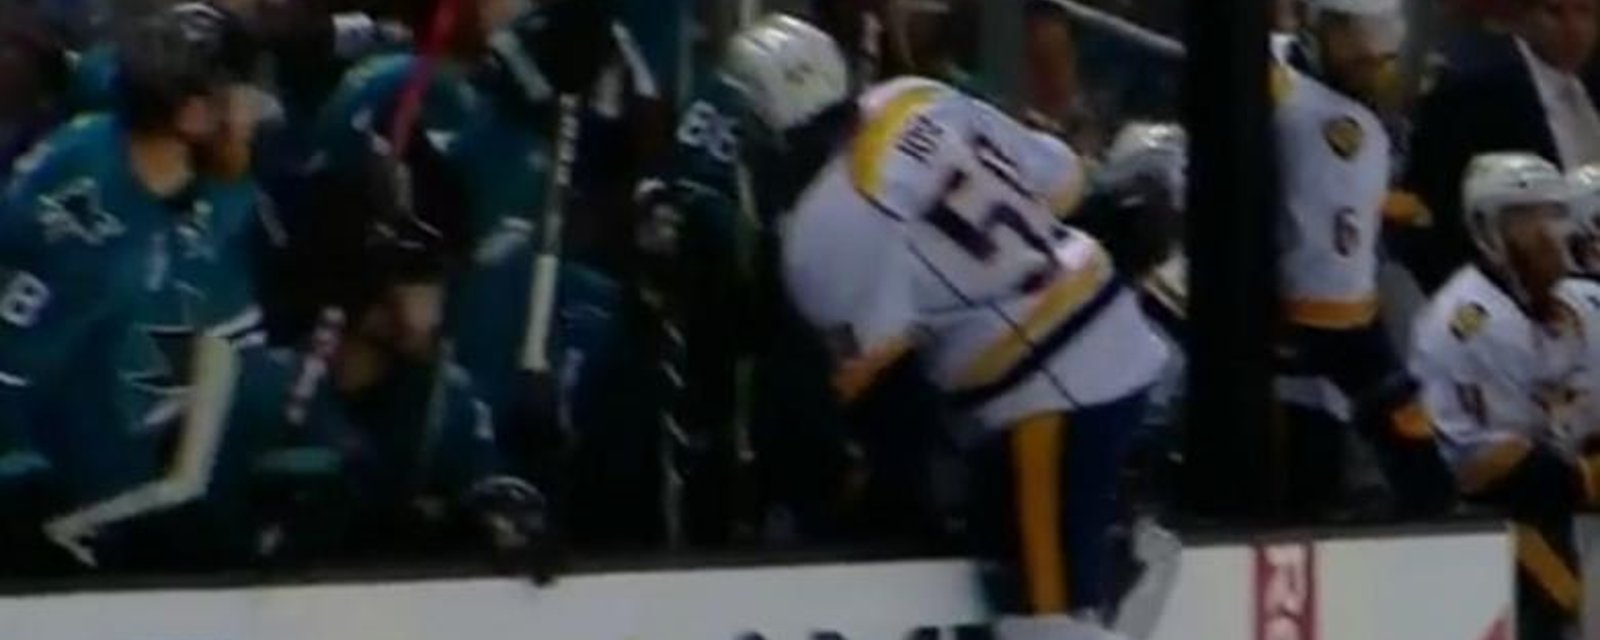 Roman Josi tries to jump on the wrong bench to avoid a penalty.